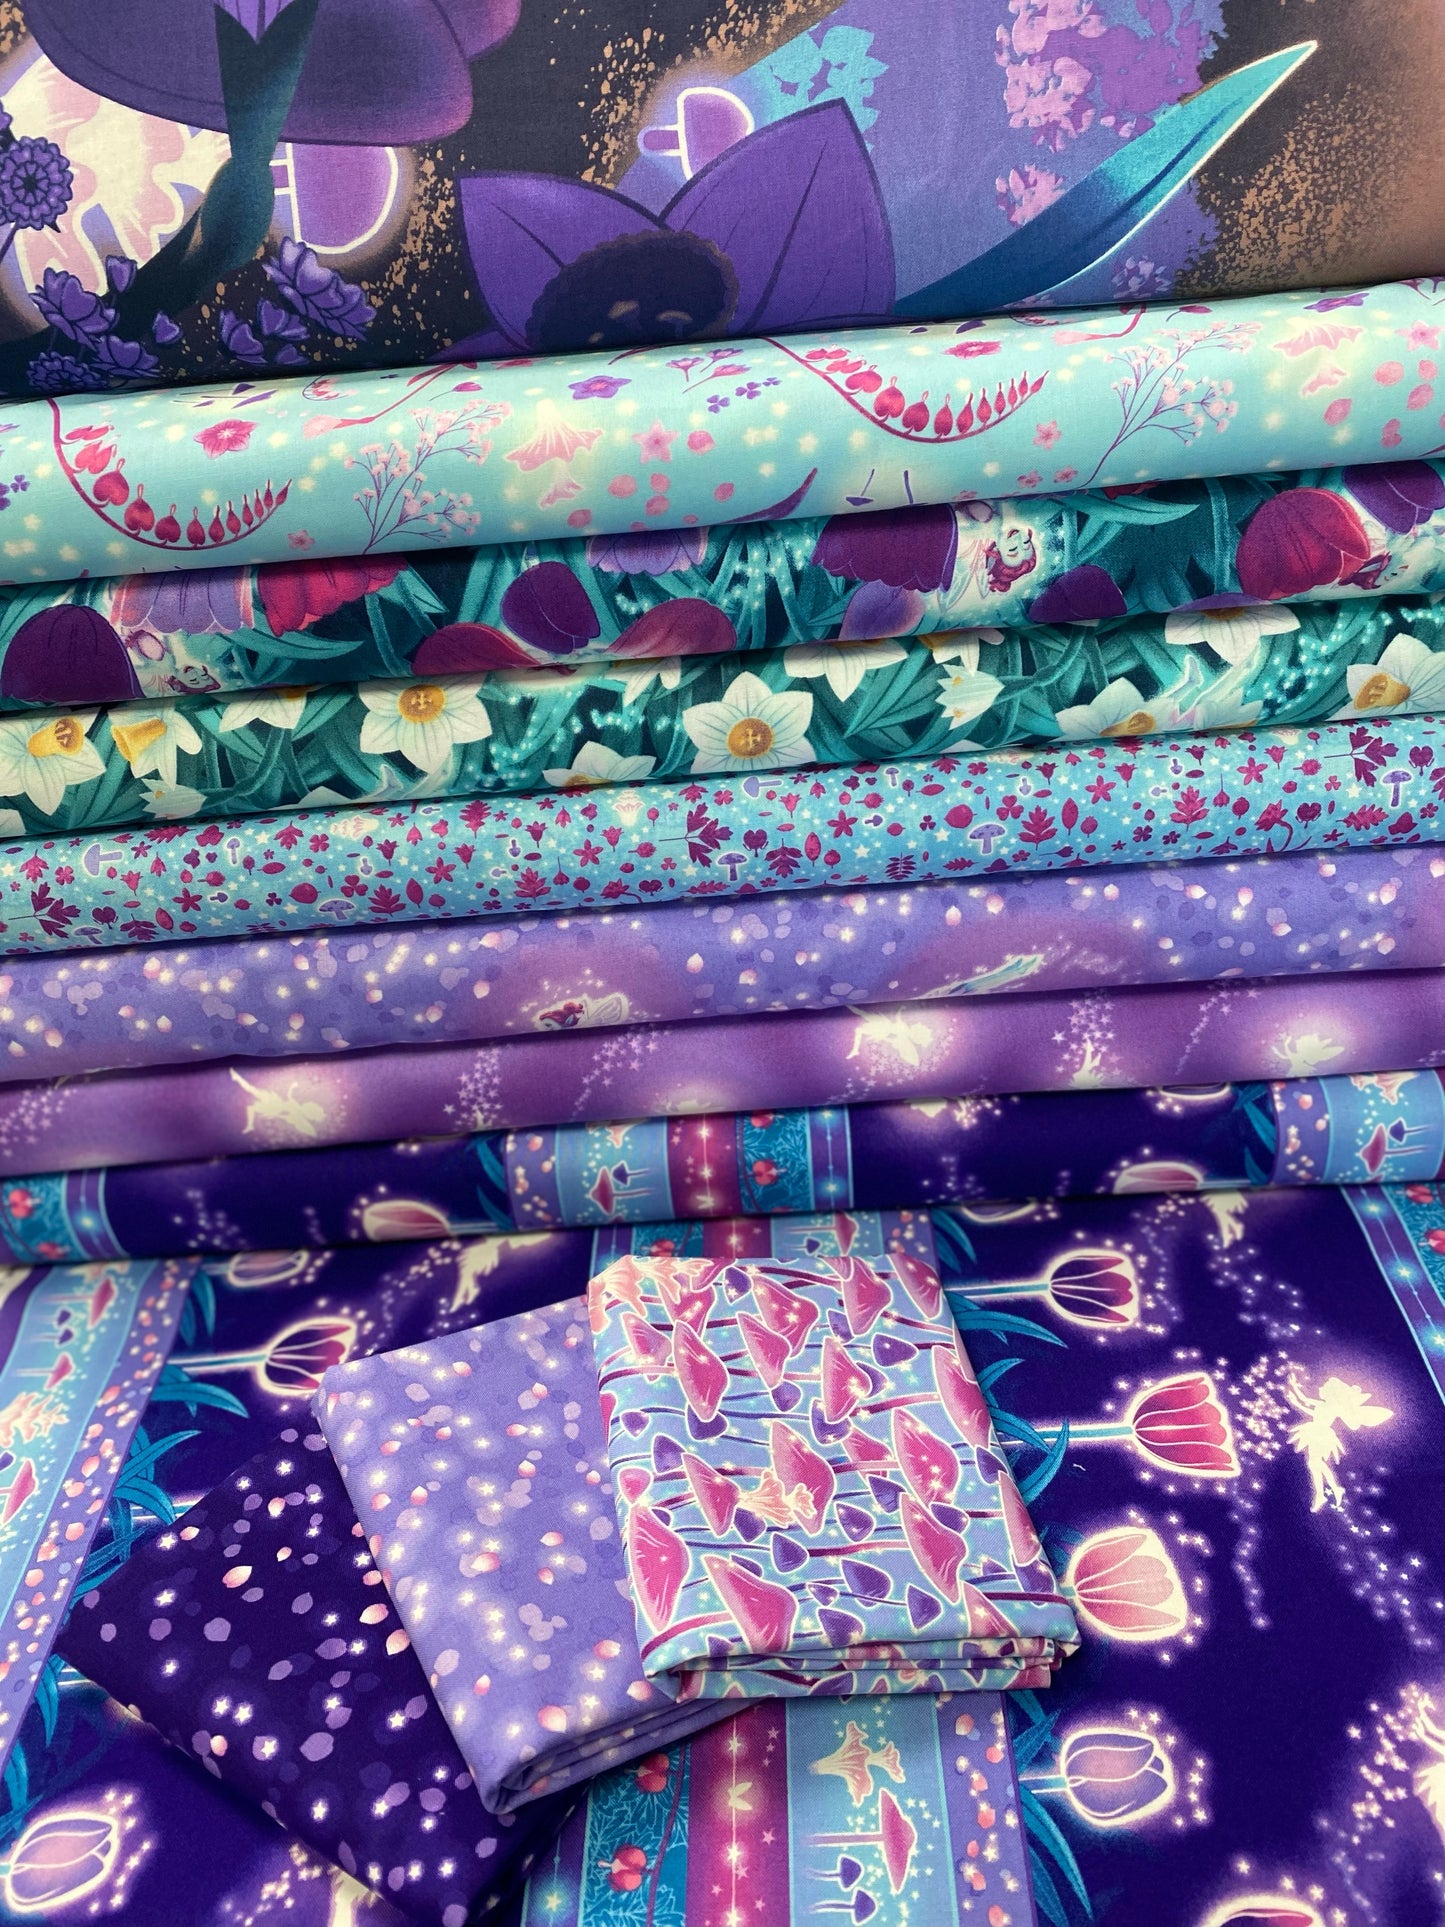 Pixies & Petals Glows in the Dark by Salt Meadows Studio Pixie Silhouettes Purple    195G-55 Cotton Woven Fabric